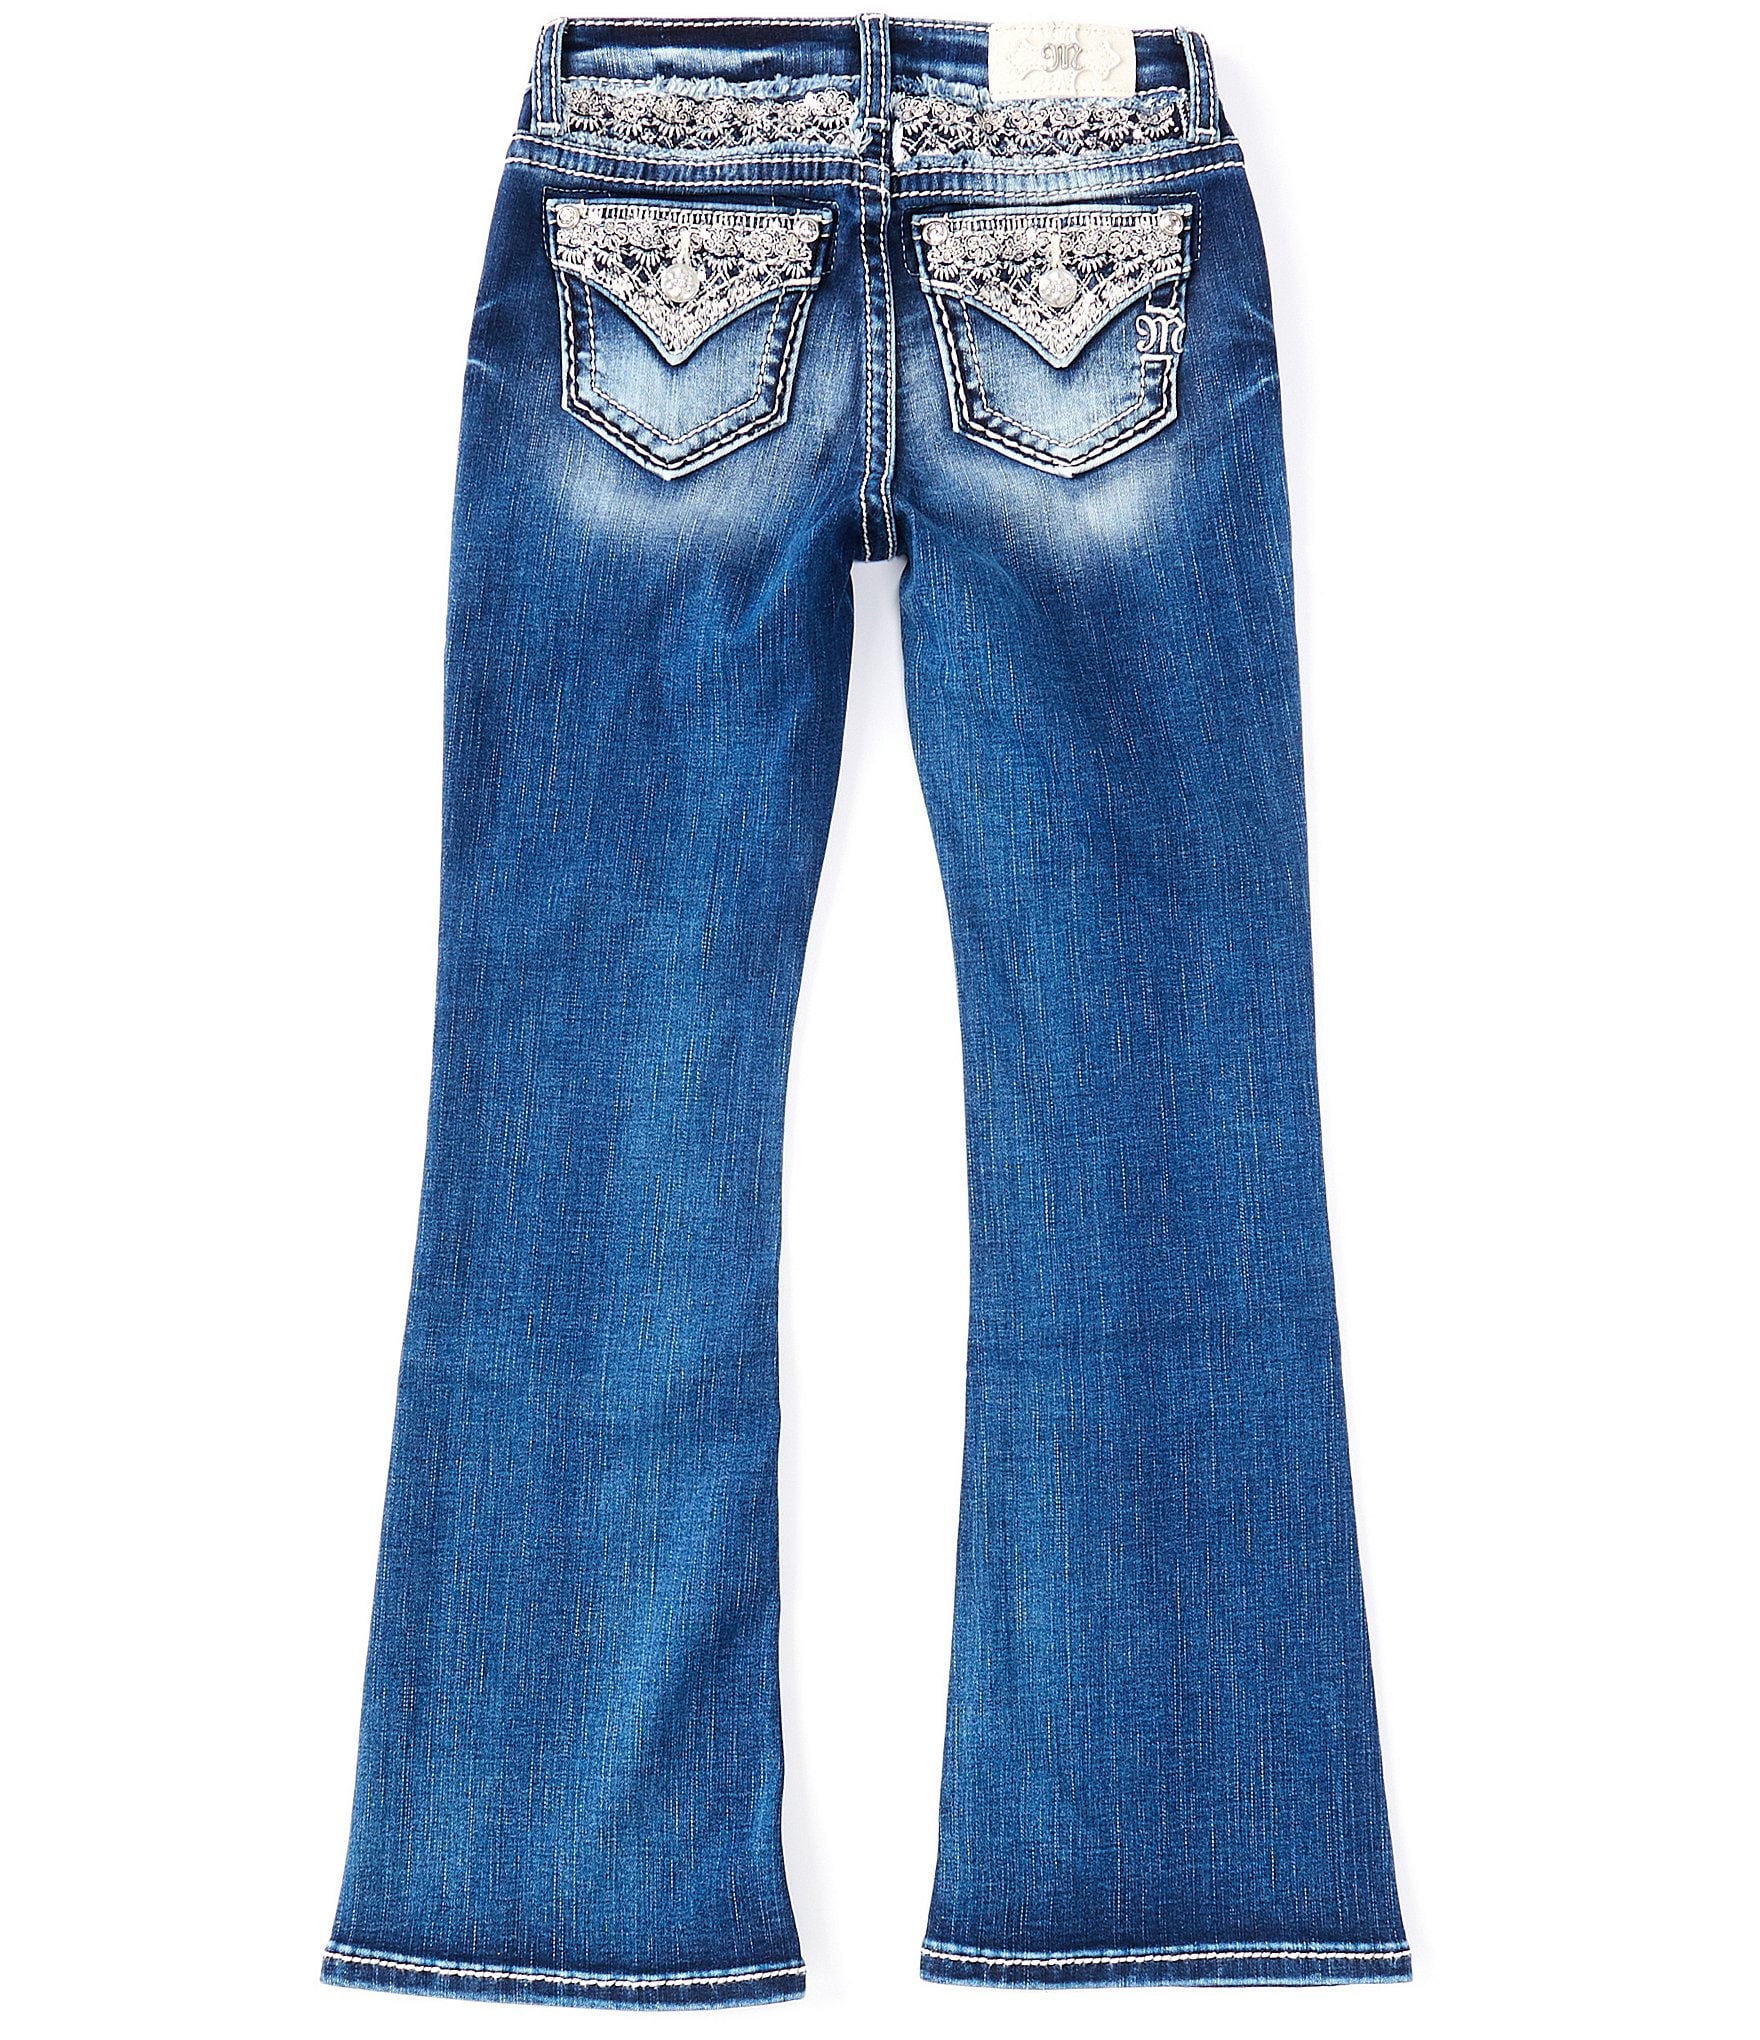 Women Cotton Jeans|Stylish/Latest 5 Button|Ankle Length|Fringes||Daily  use/wear|Stretchable Pant/Trouser|HIGH Waist/Rise|Size 28-34|fashion looks  Women's Slim Fit 5 Button Denim Jeans | High Waist Ankle Length Jeans |  Stretchable Five Button High Rise ...